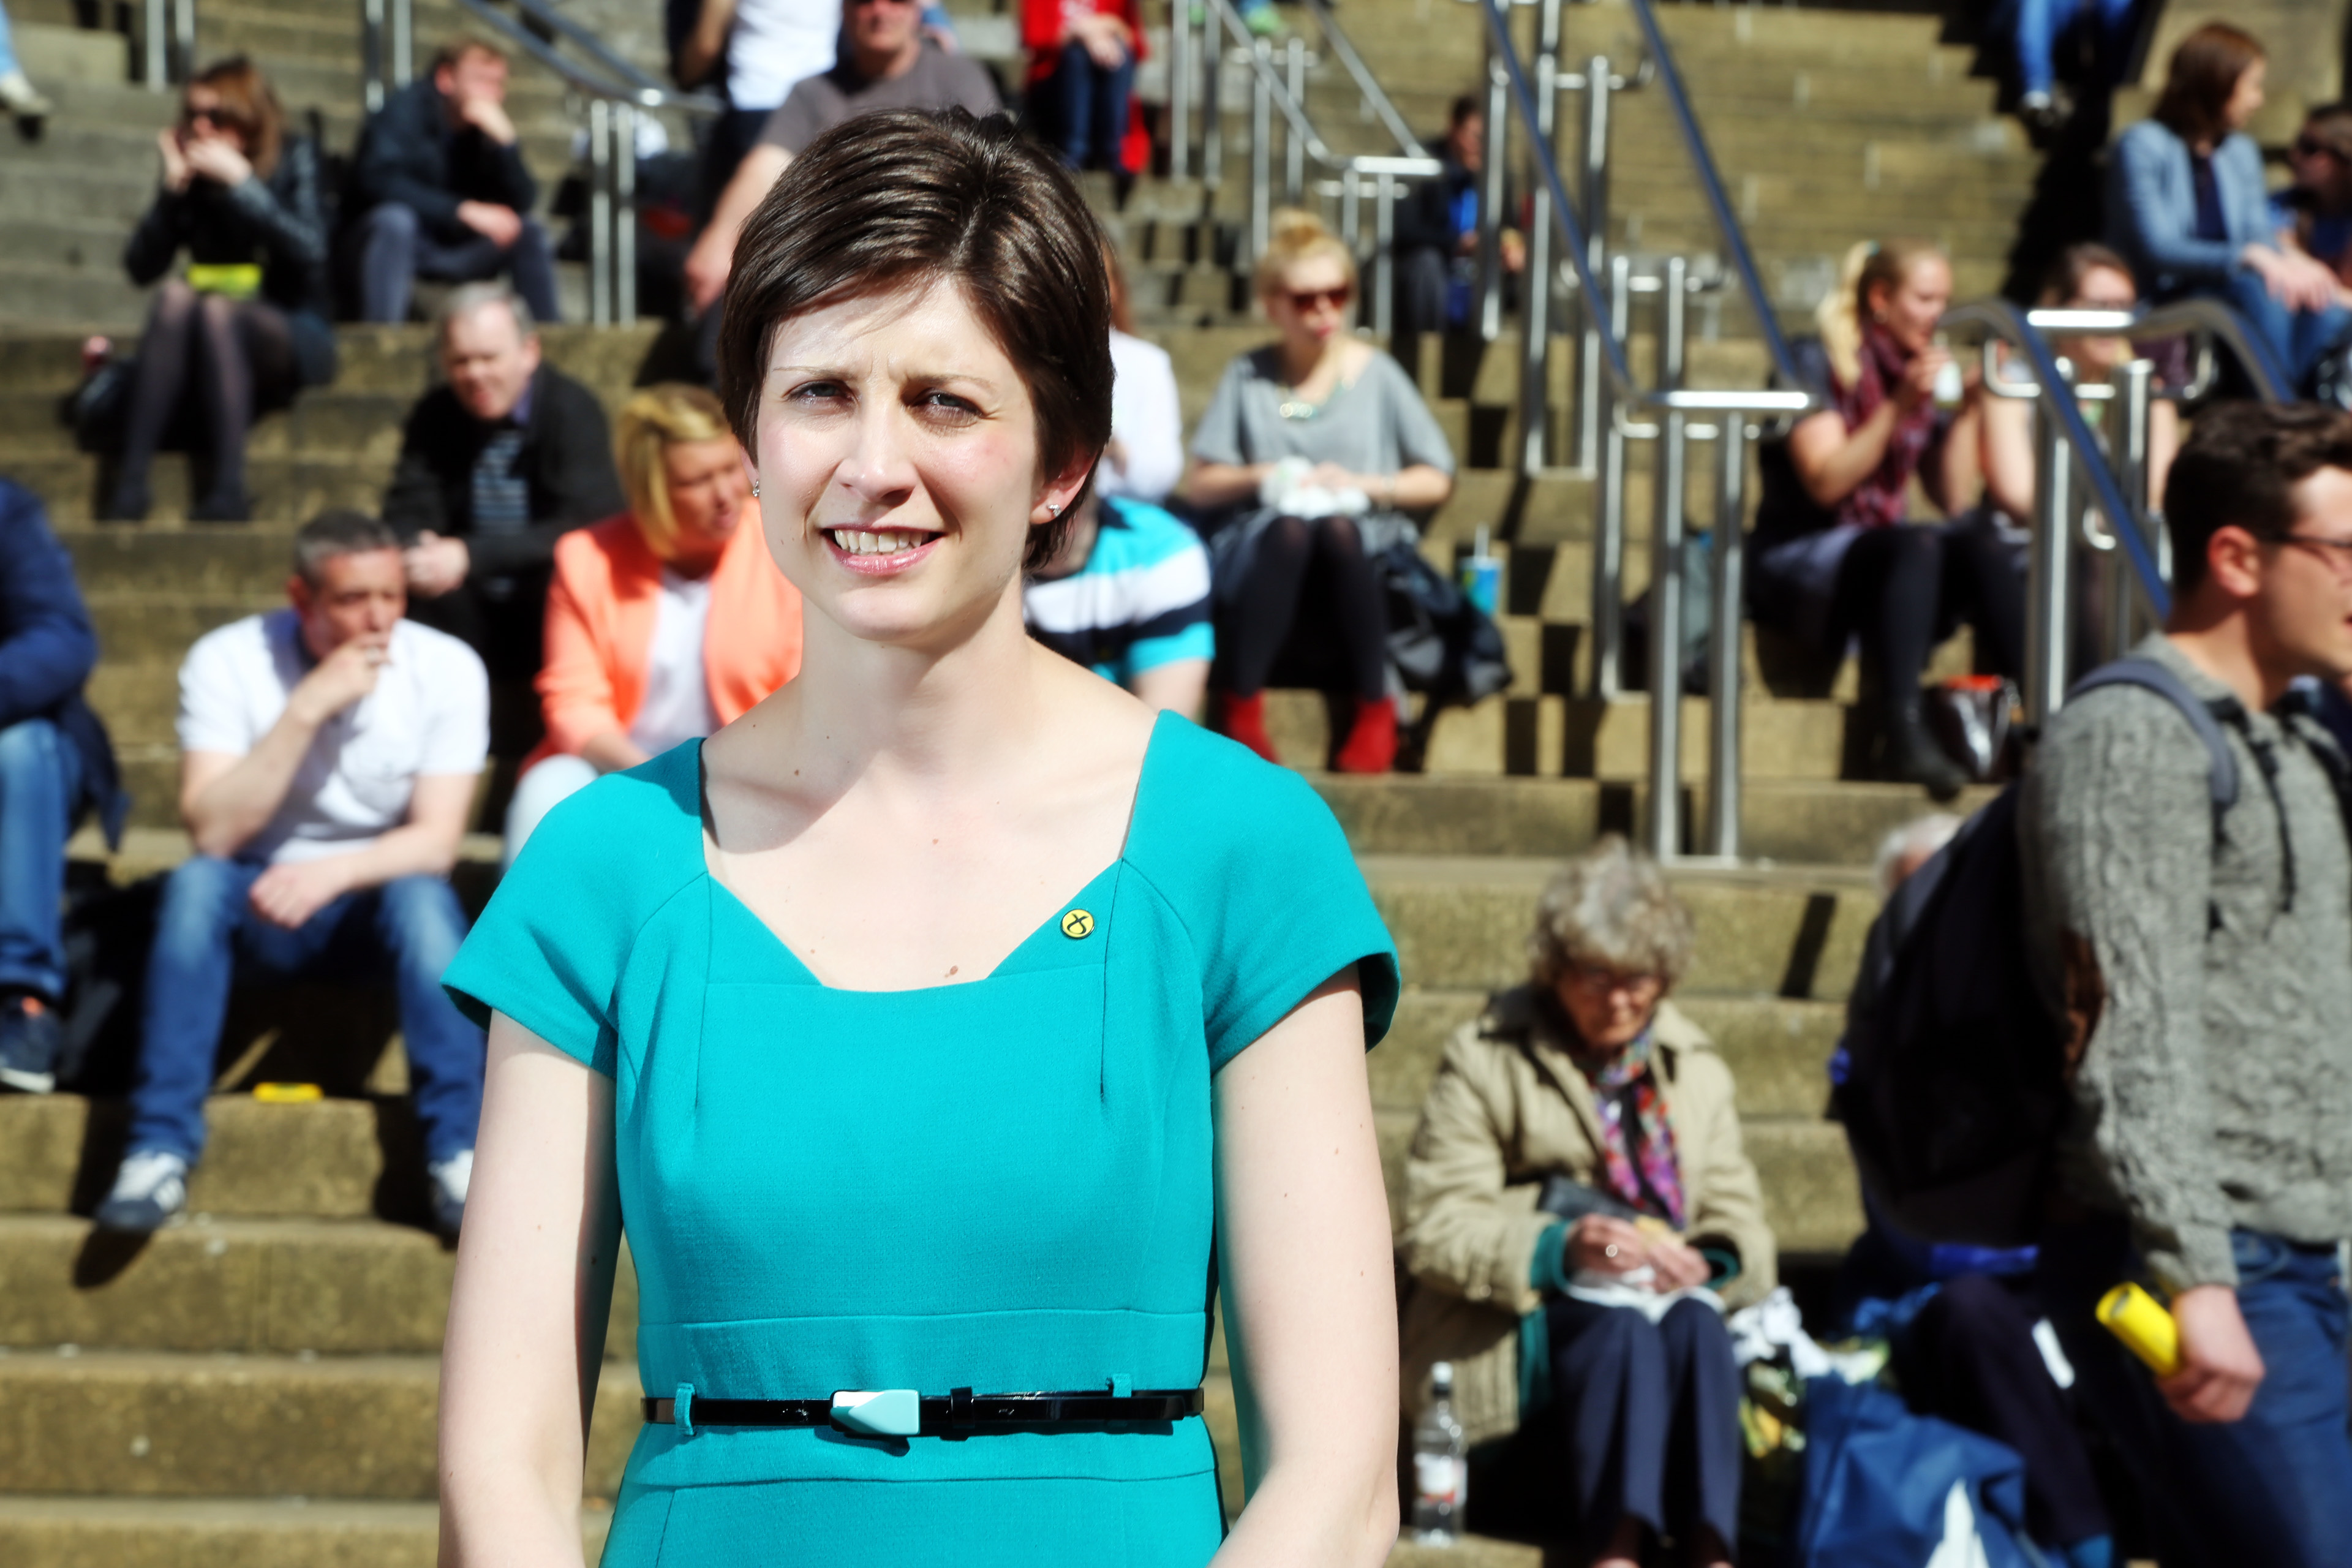 MP Thewliss rails against Tory austerity